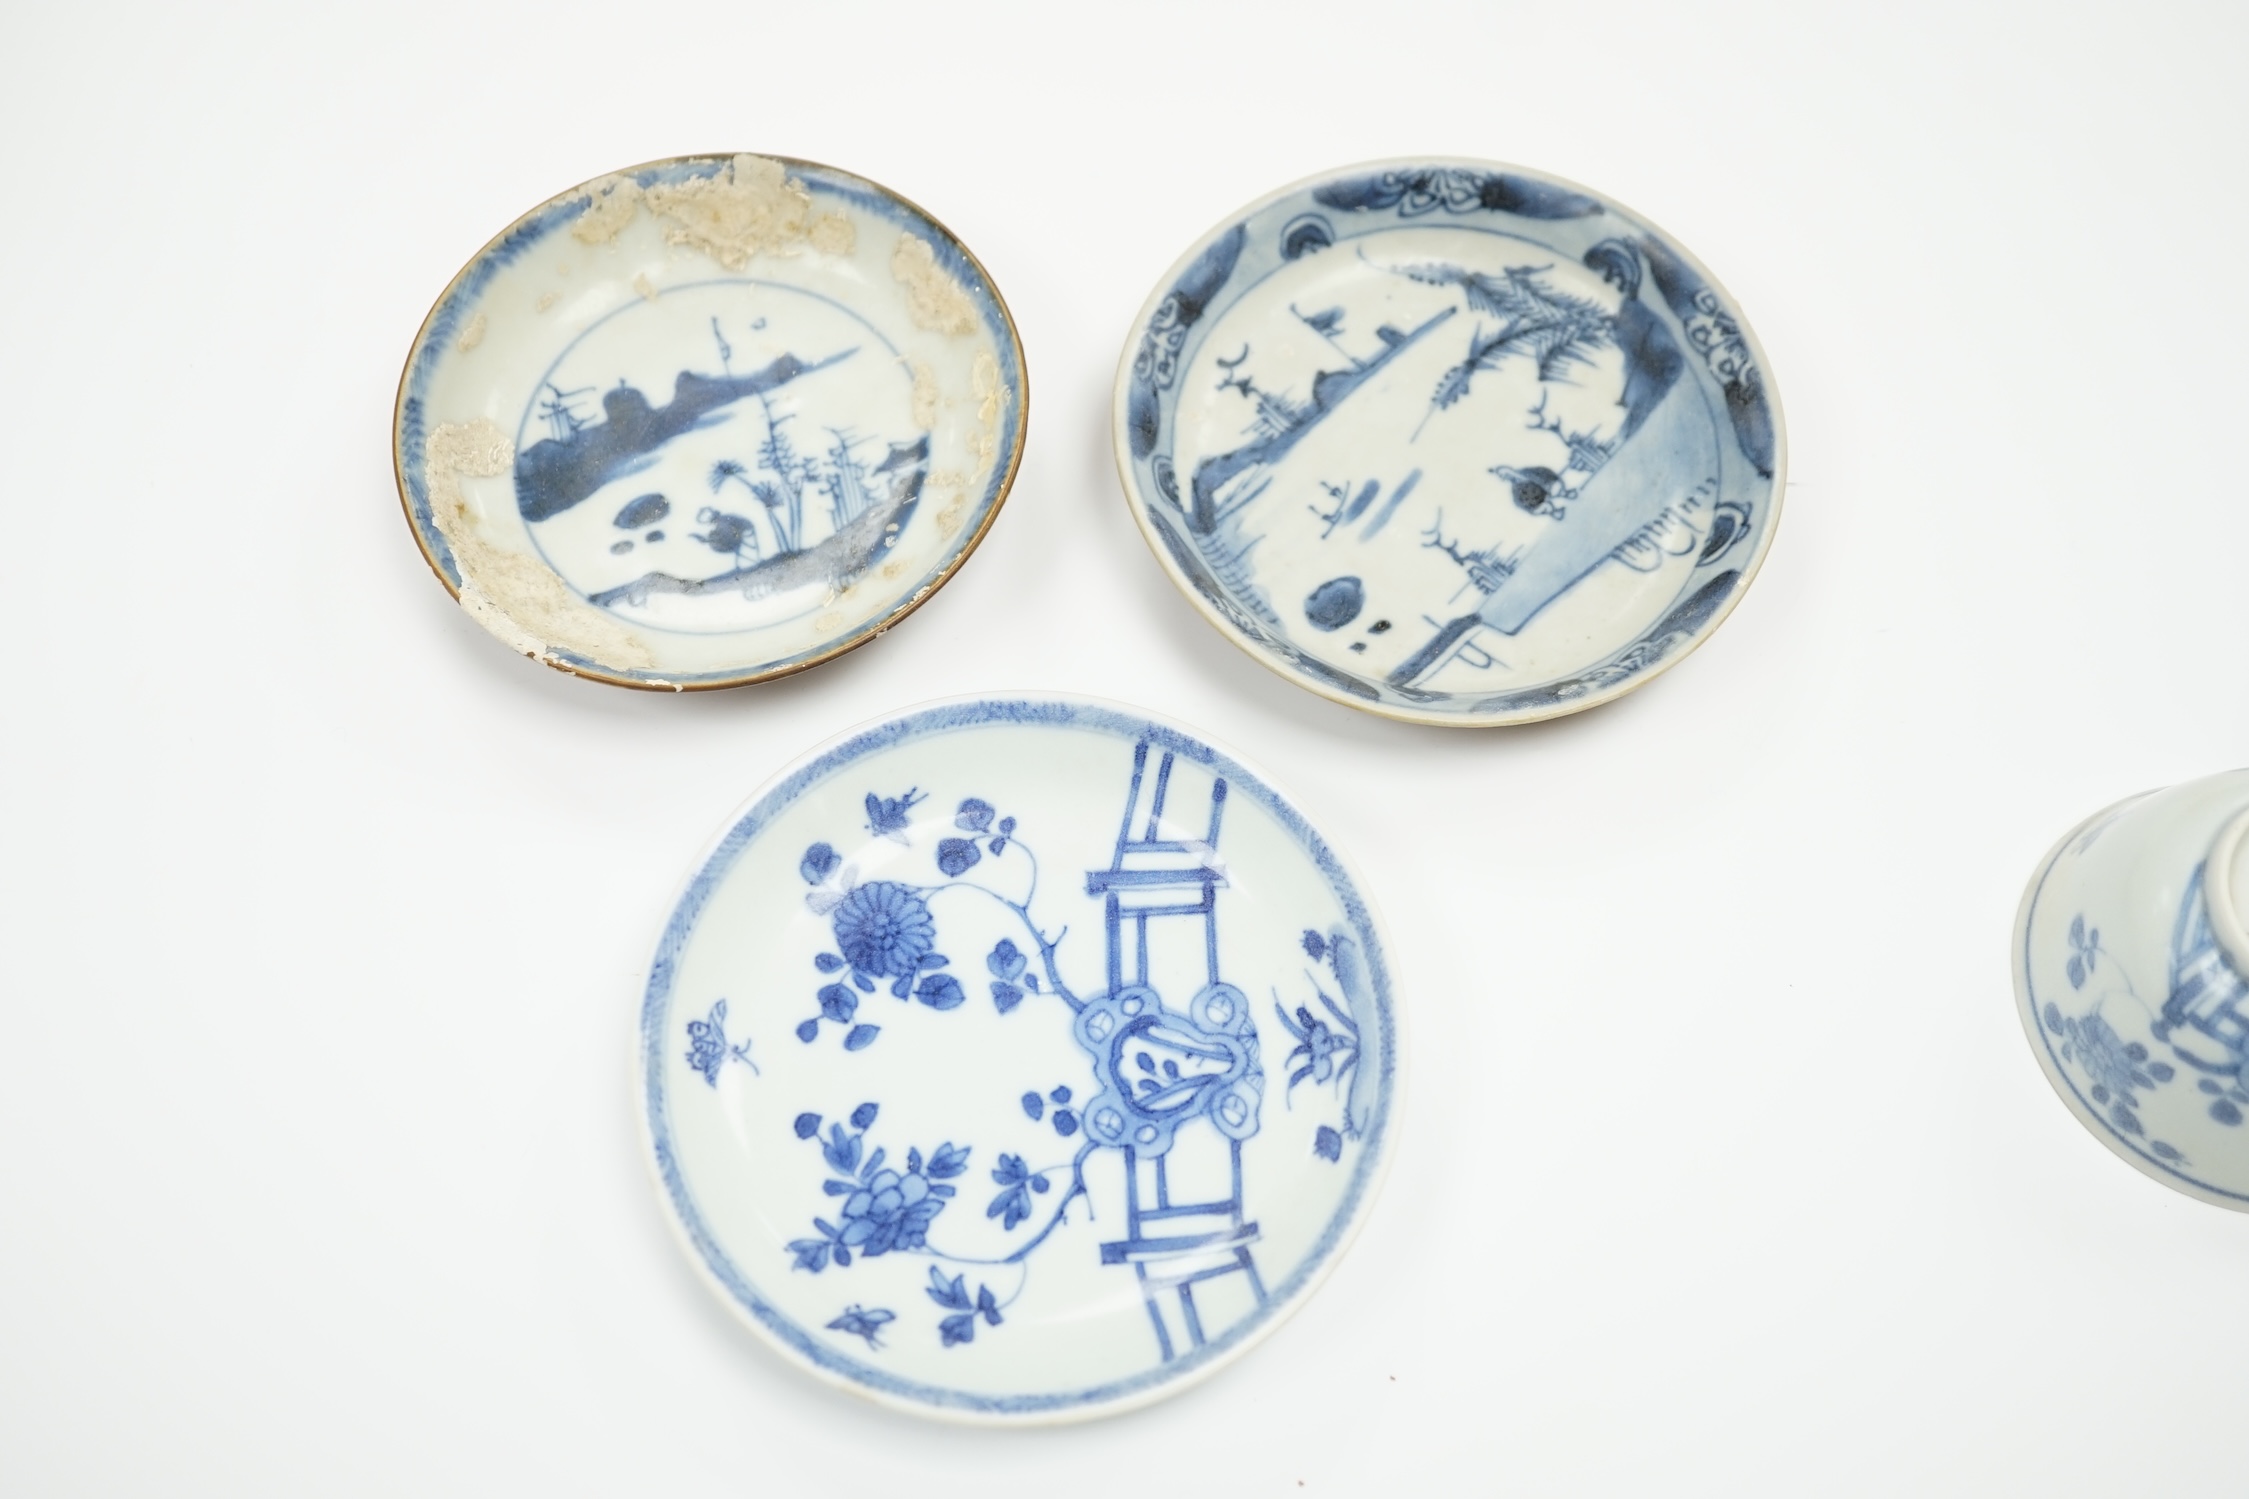 Three Chinese blue and white Ca Mau cargo teabowls and saucers, 18th century, 11.5cm diameter - Image 3 of 4